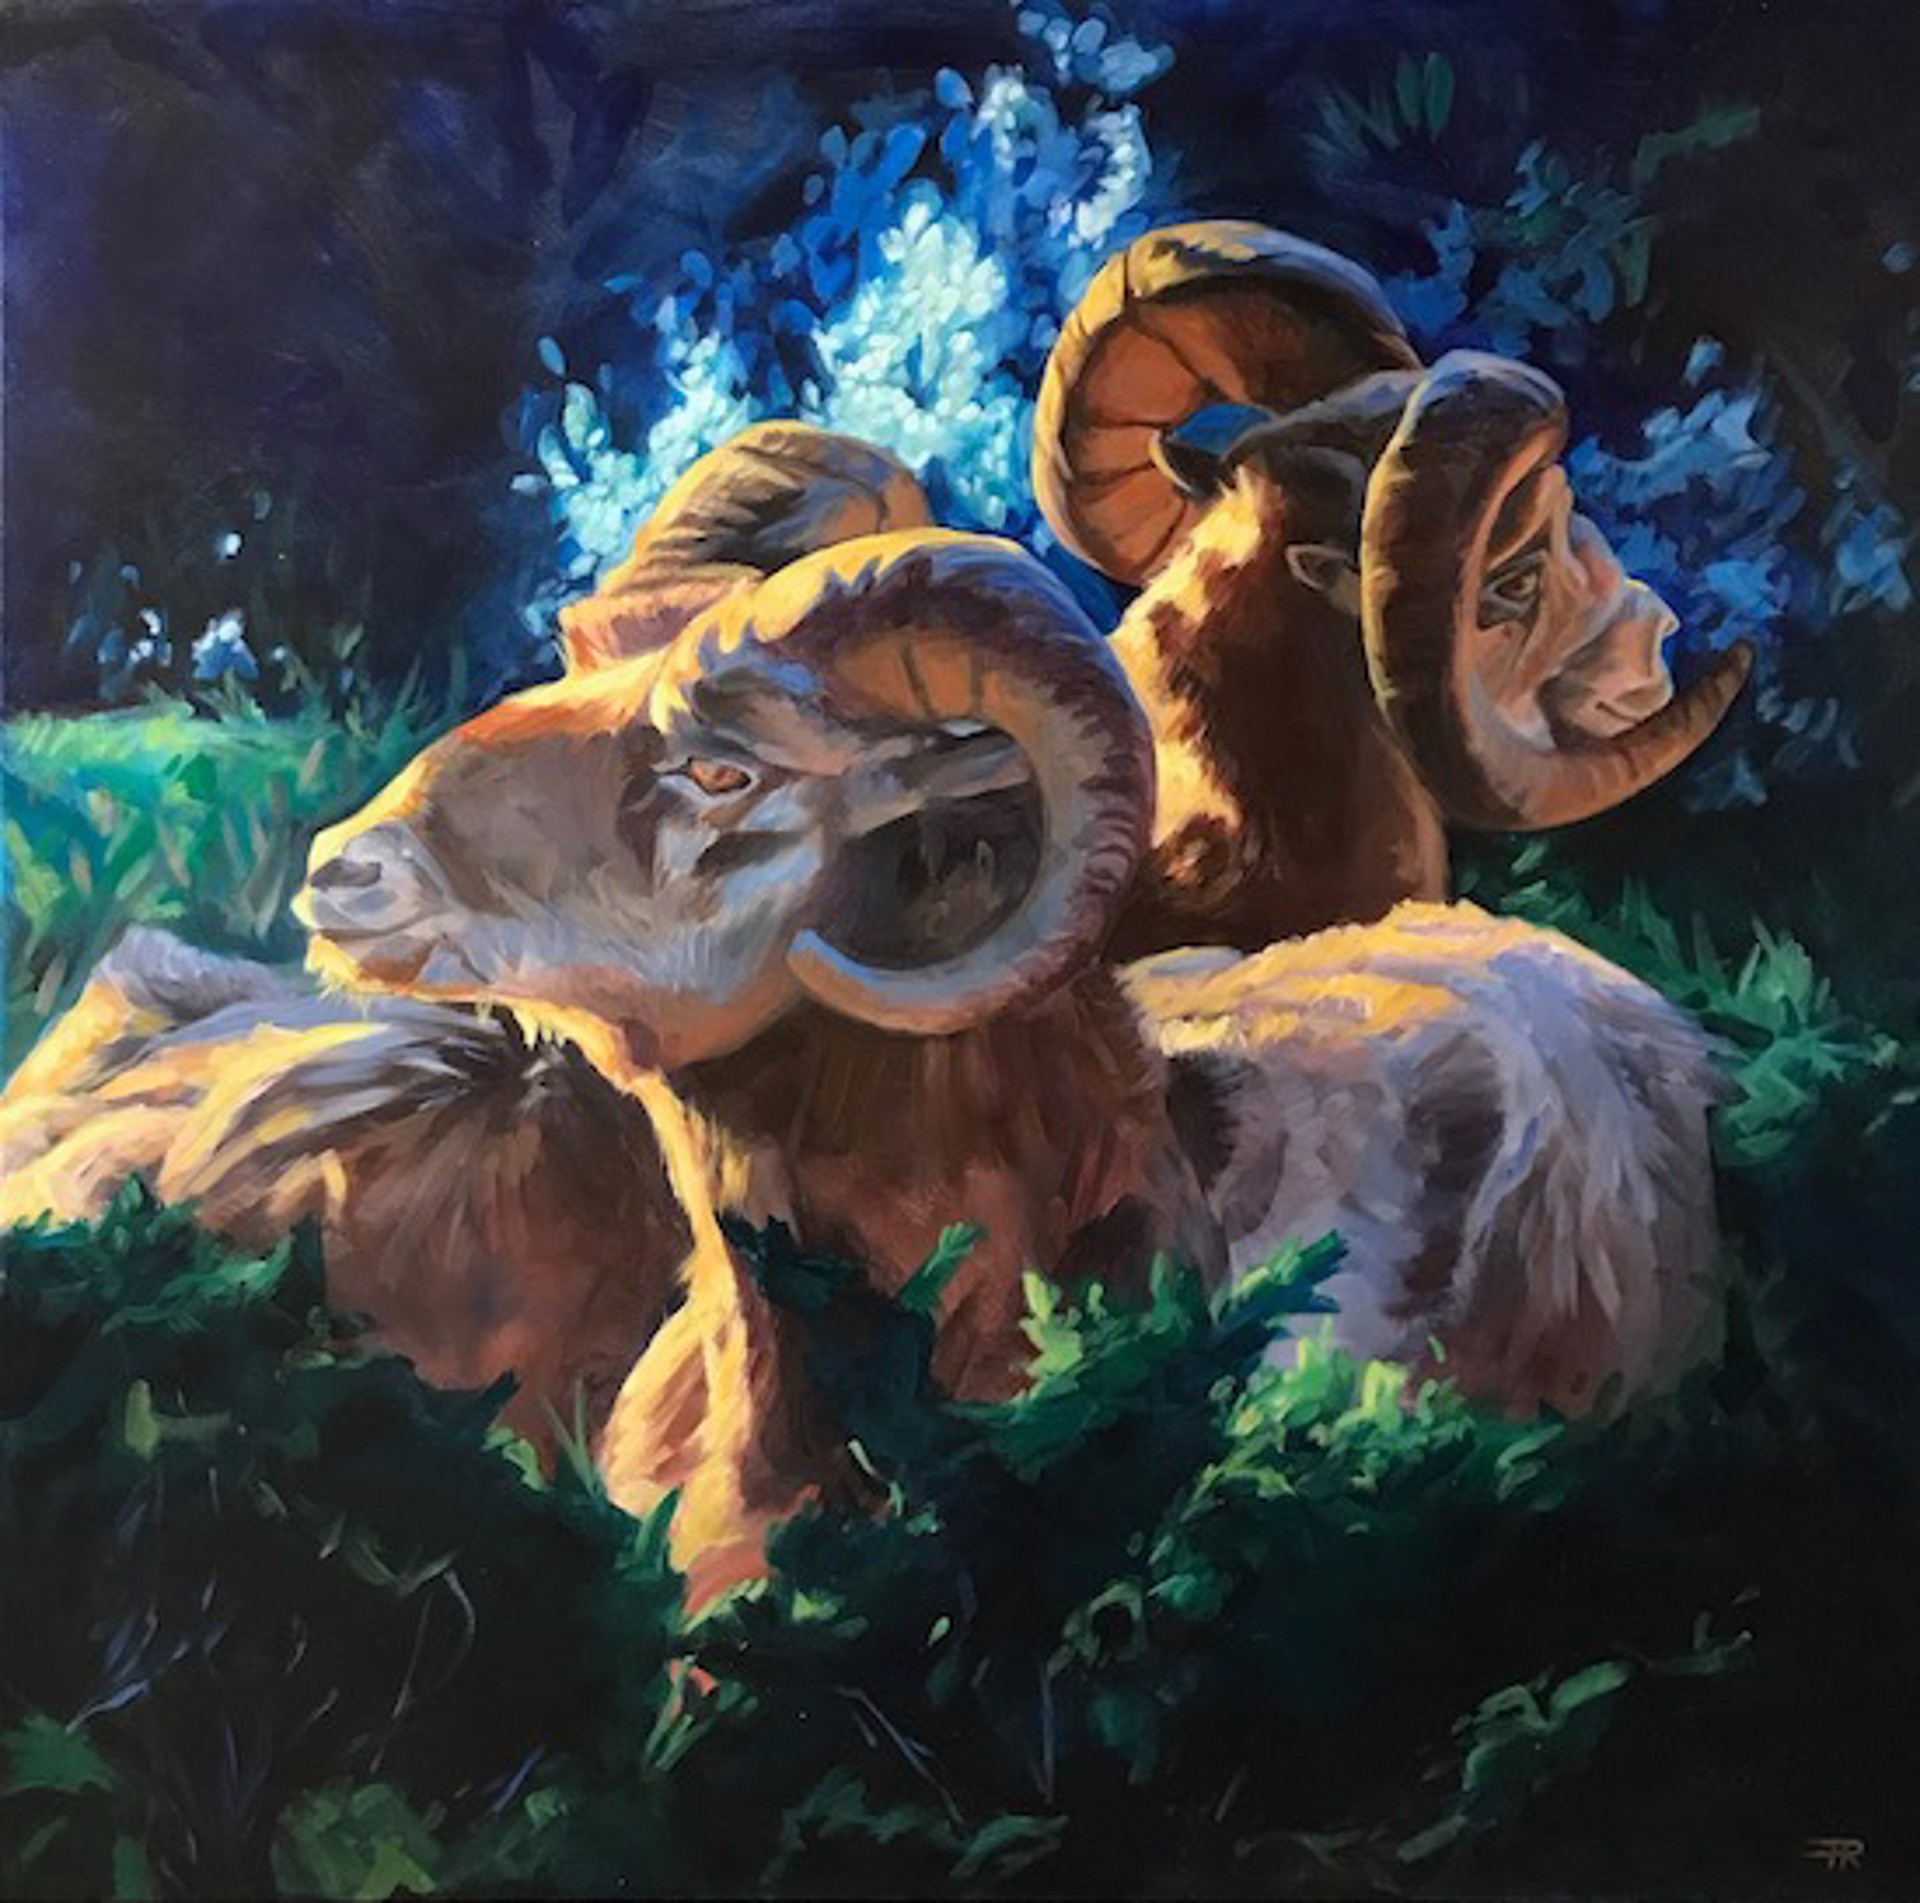 Evening Rest by Pascale Robinson